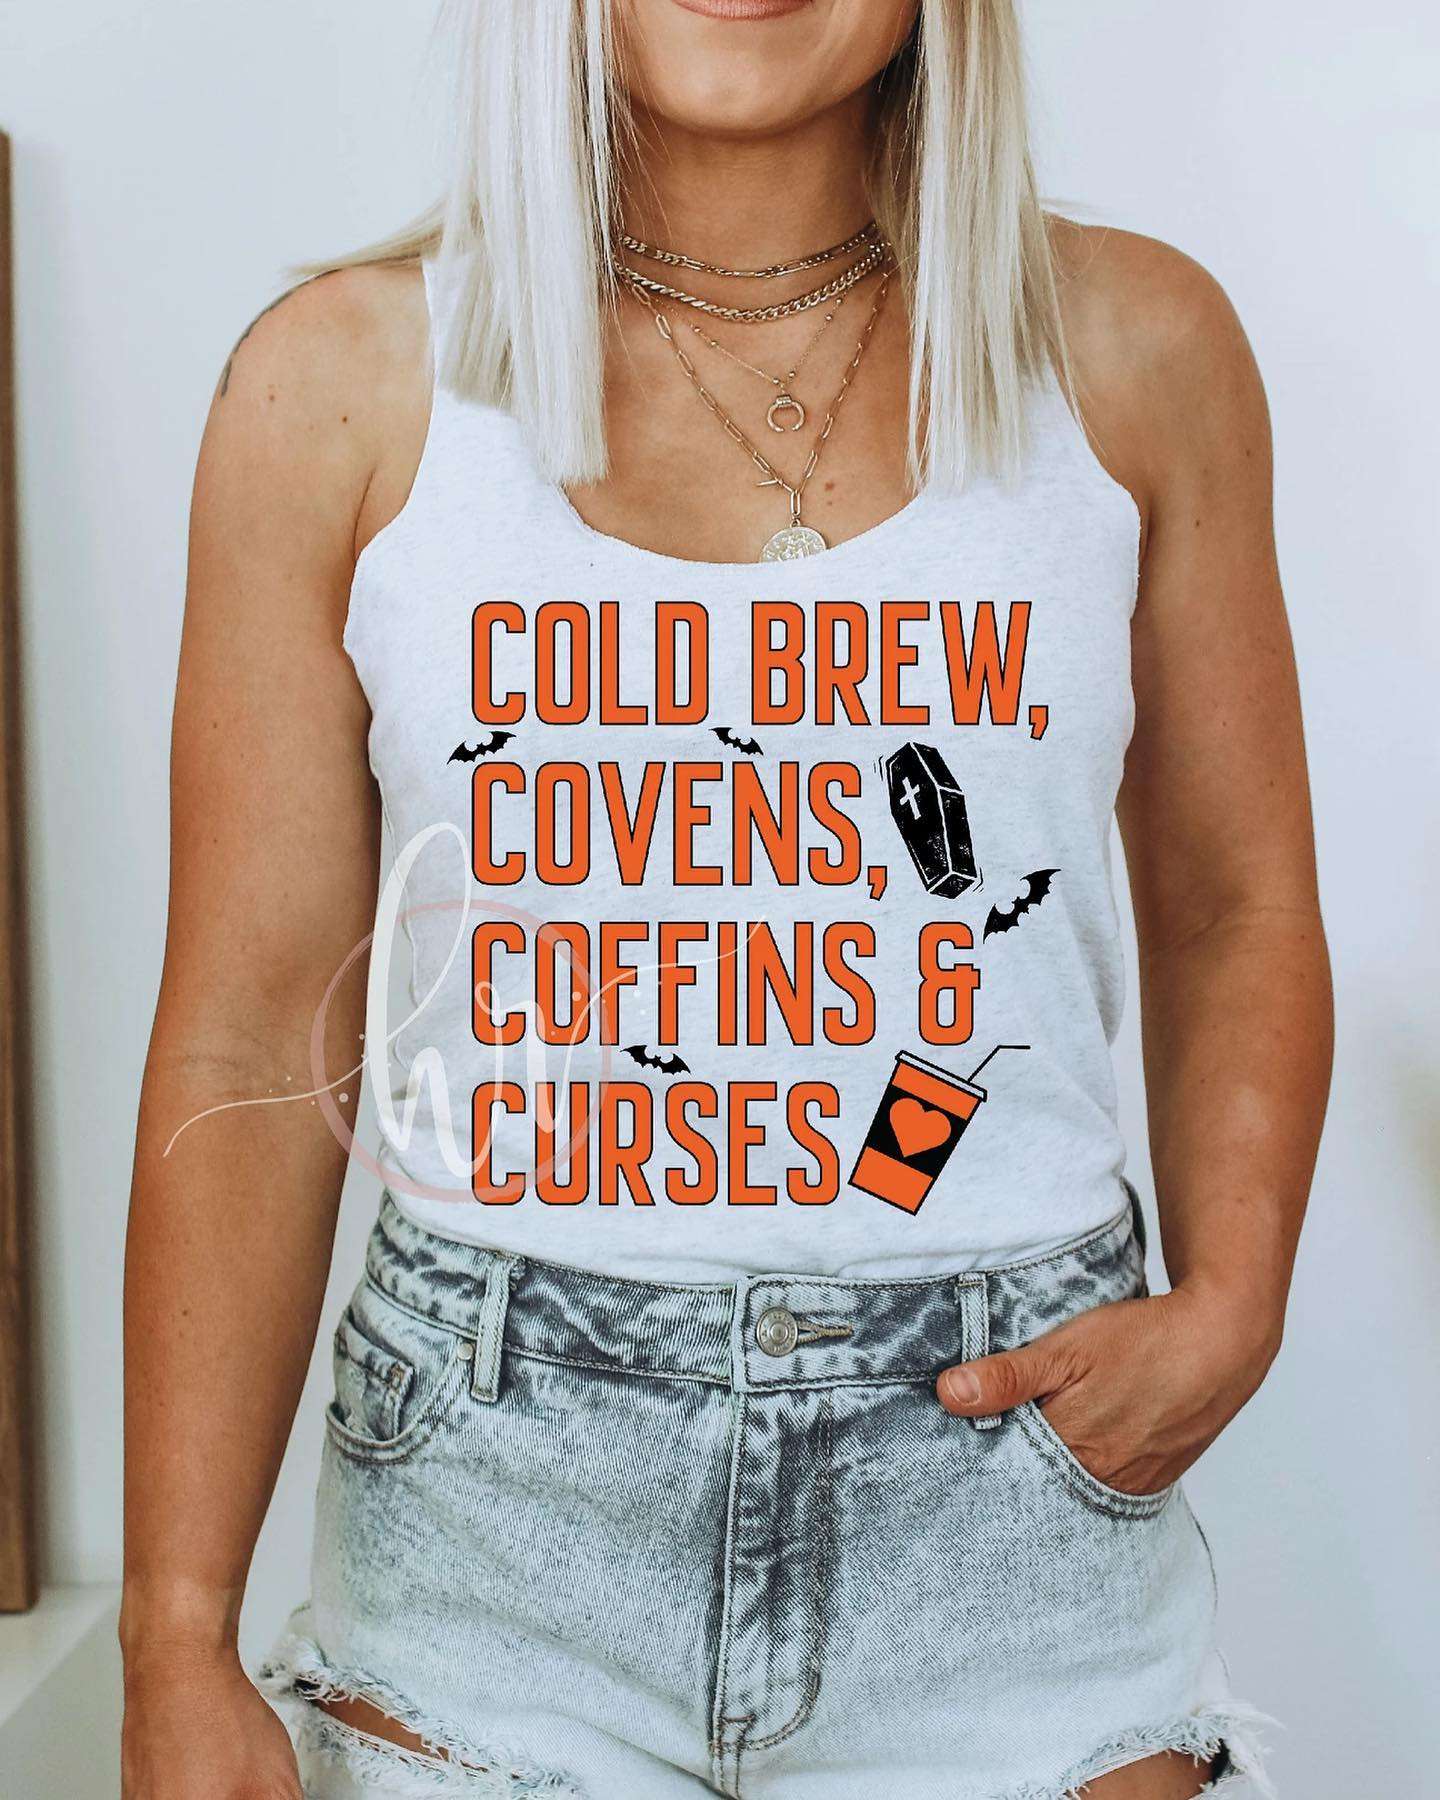 Cold brew covens coffins and curses